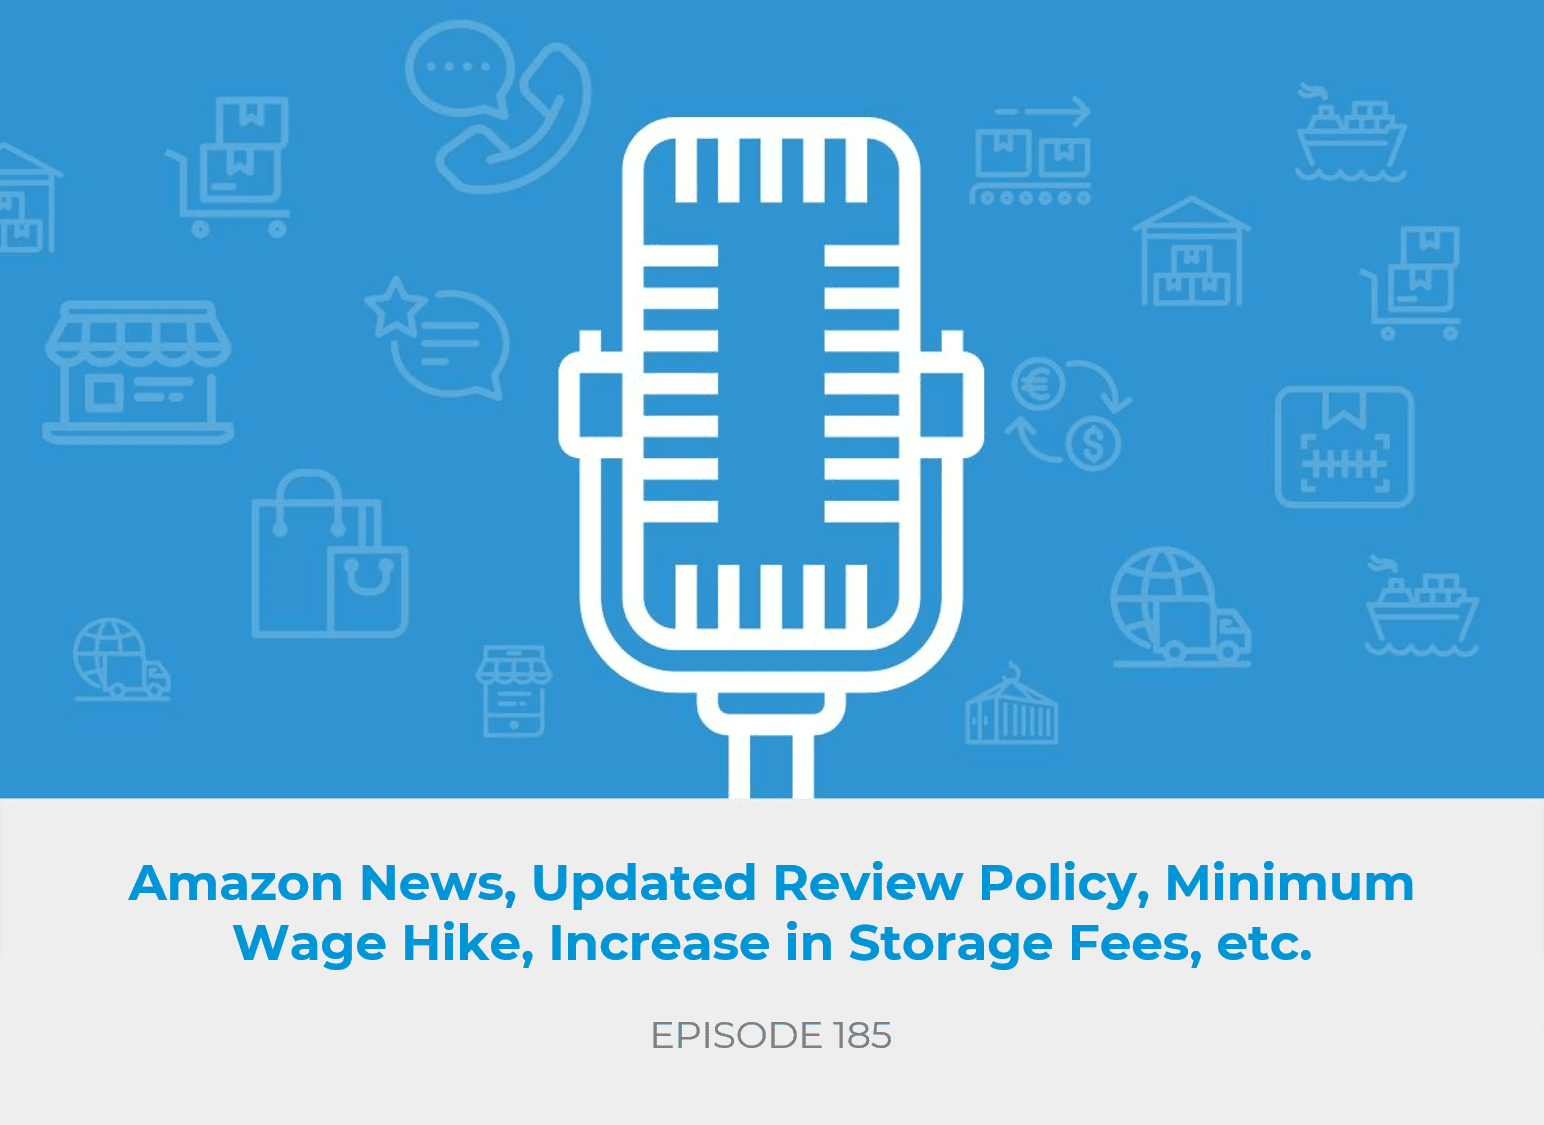 Amazon News, Updated Review Policy, Minimum Wage Hike, Increase in Storage Fees, etc.